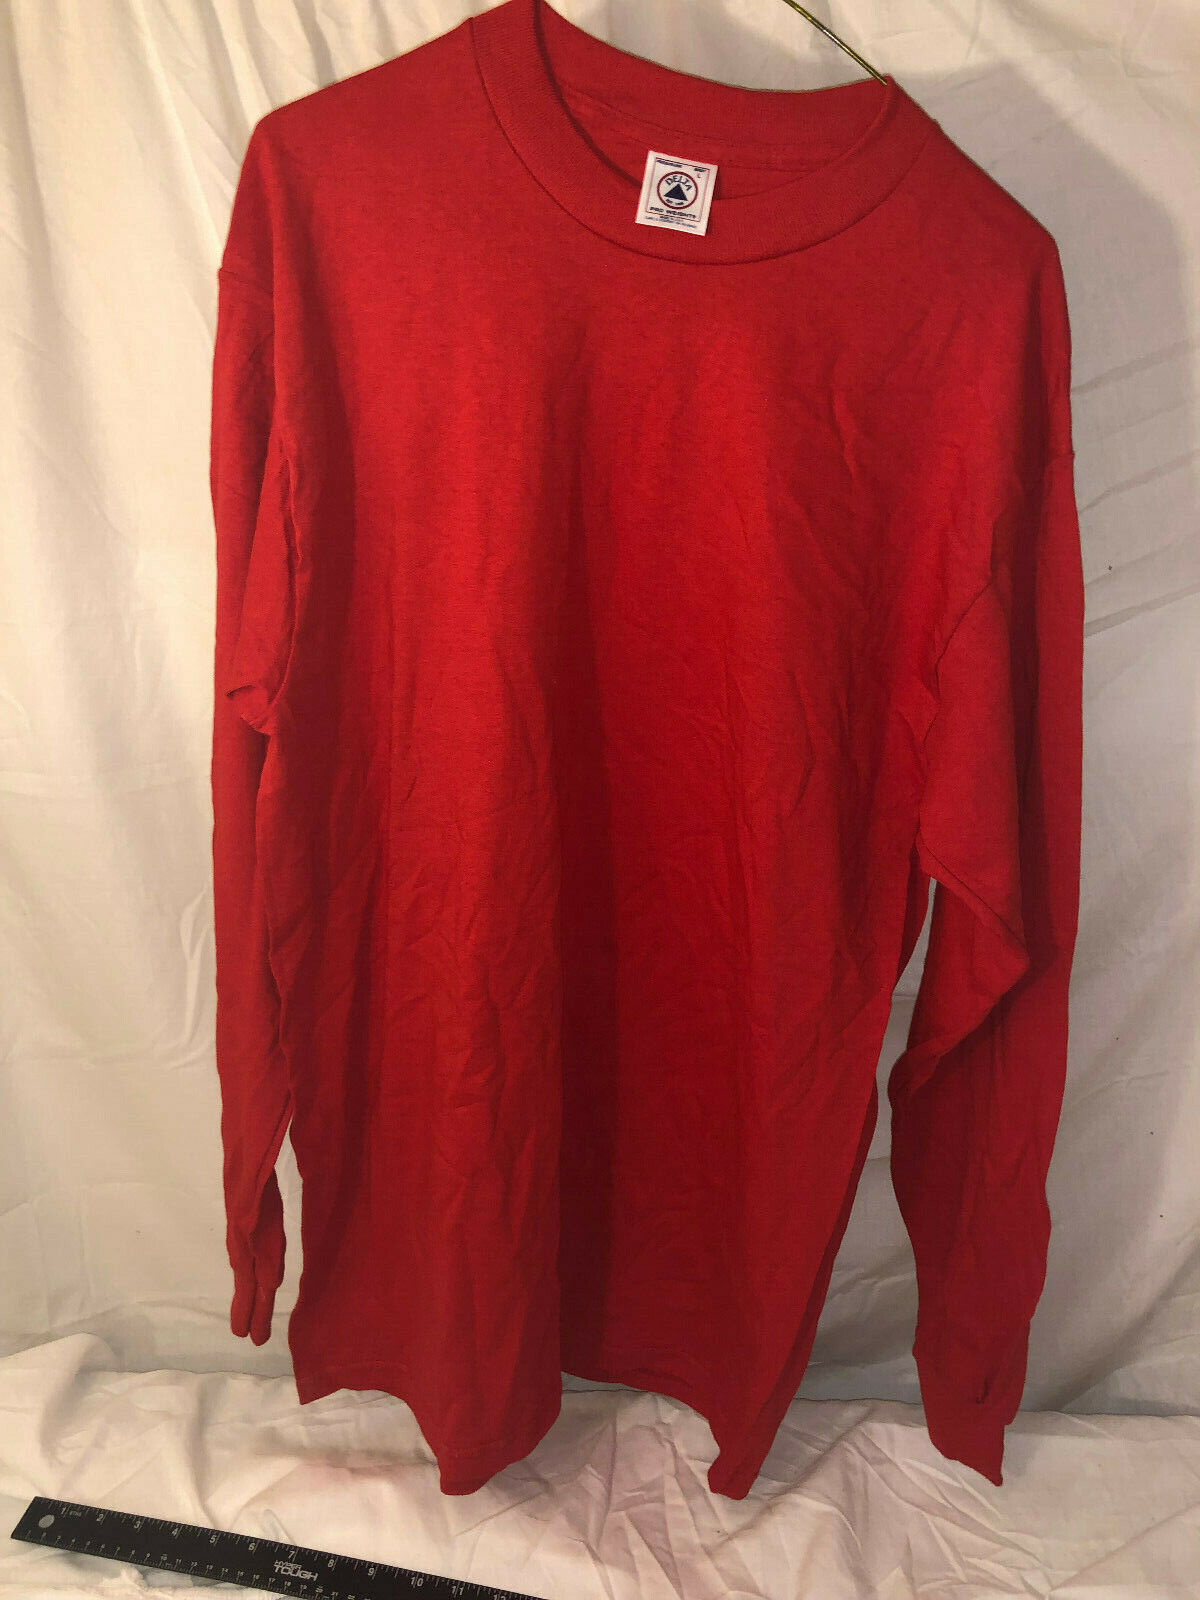 Primary image for NWOTs Marine Style Red Delta Pro- Weight Long Sleeve Shirt 100% Cotton Large